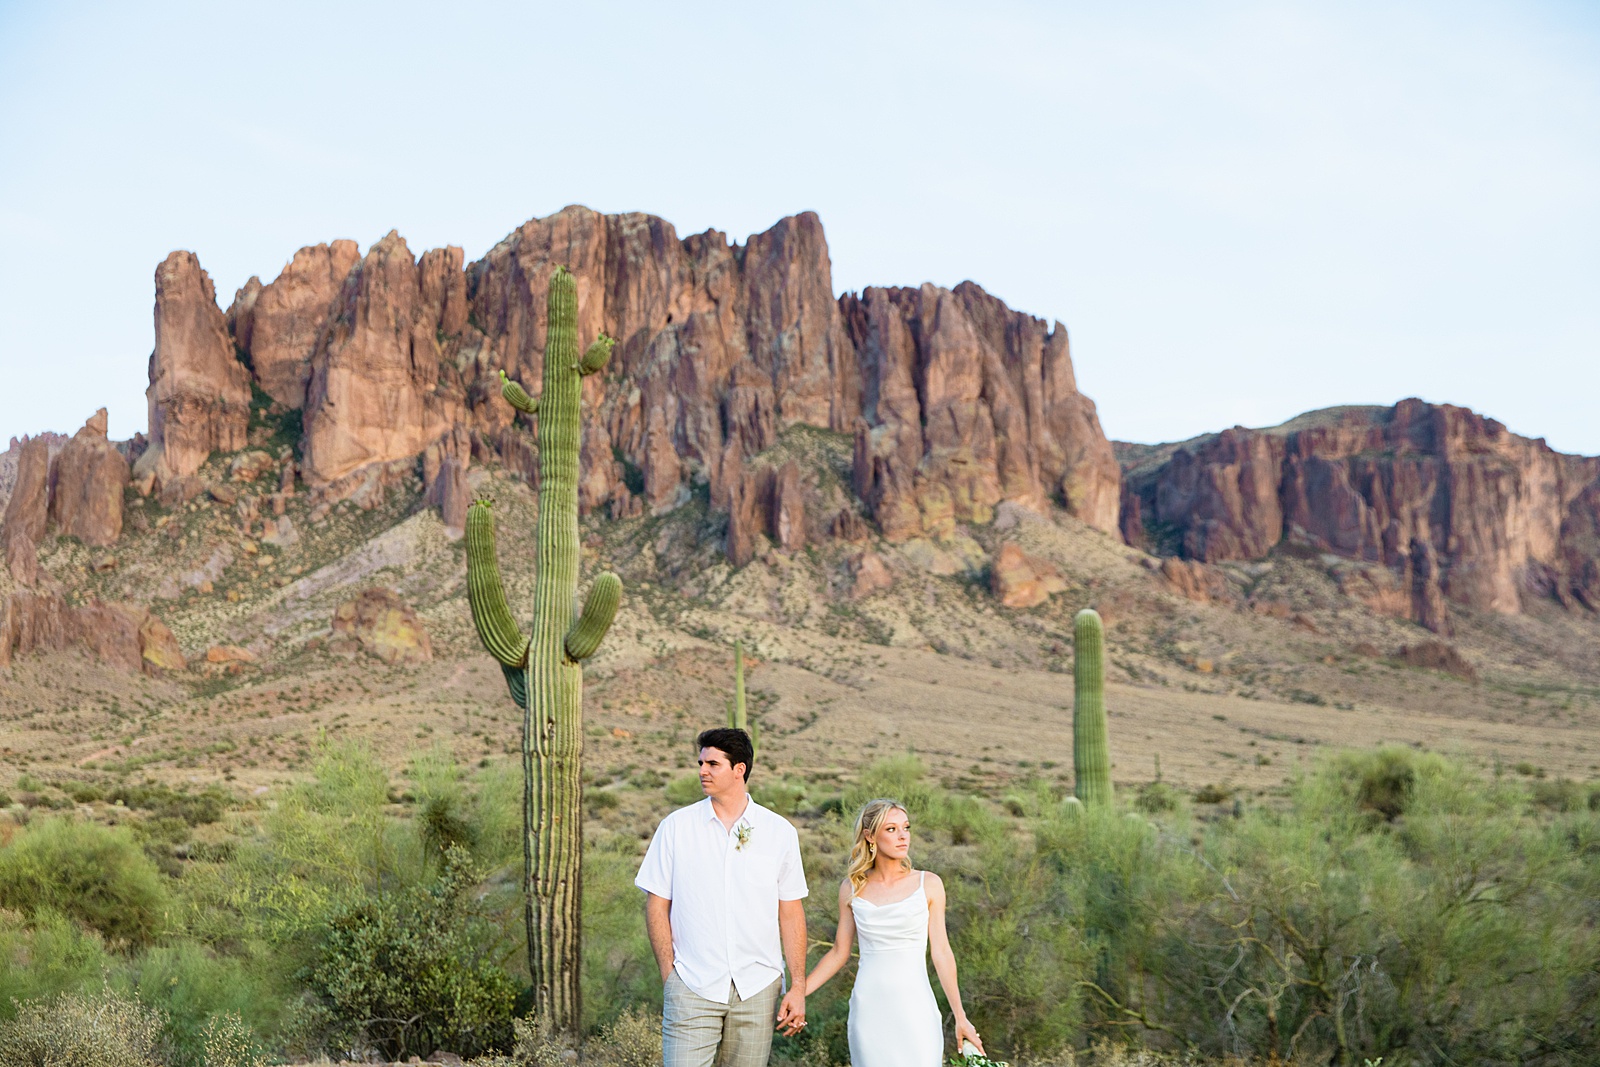 Bride and groom pose during their Superstition Mountain Micro wedding by Arizona wedding photographer PMA Photography.